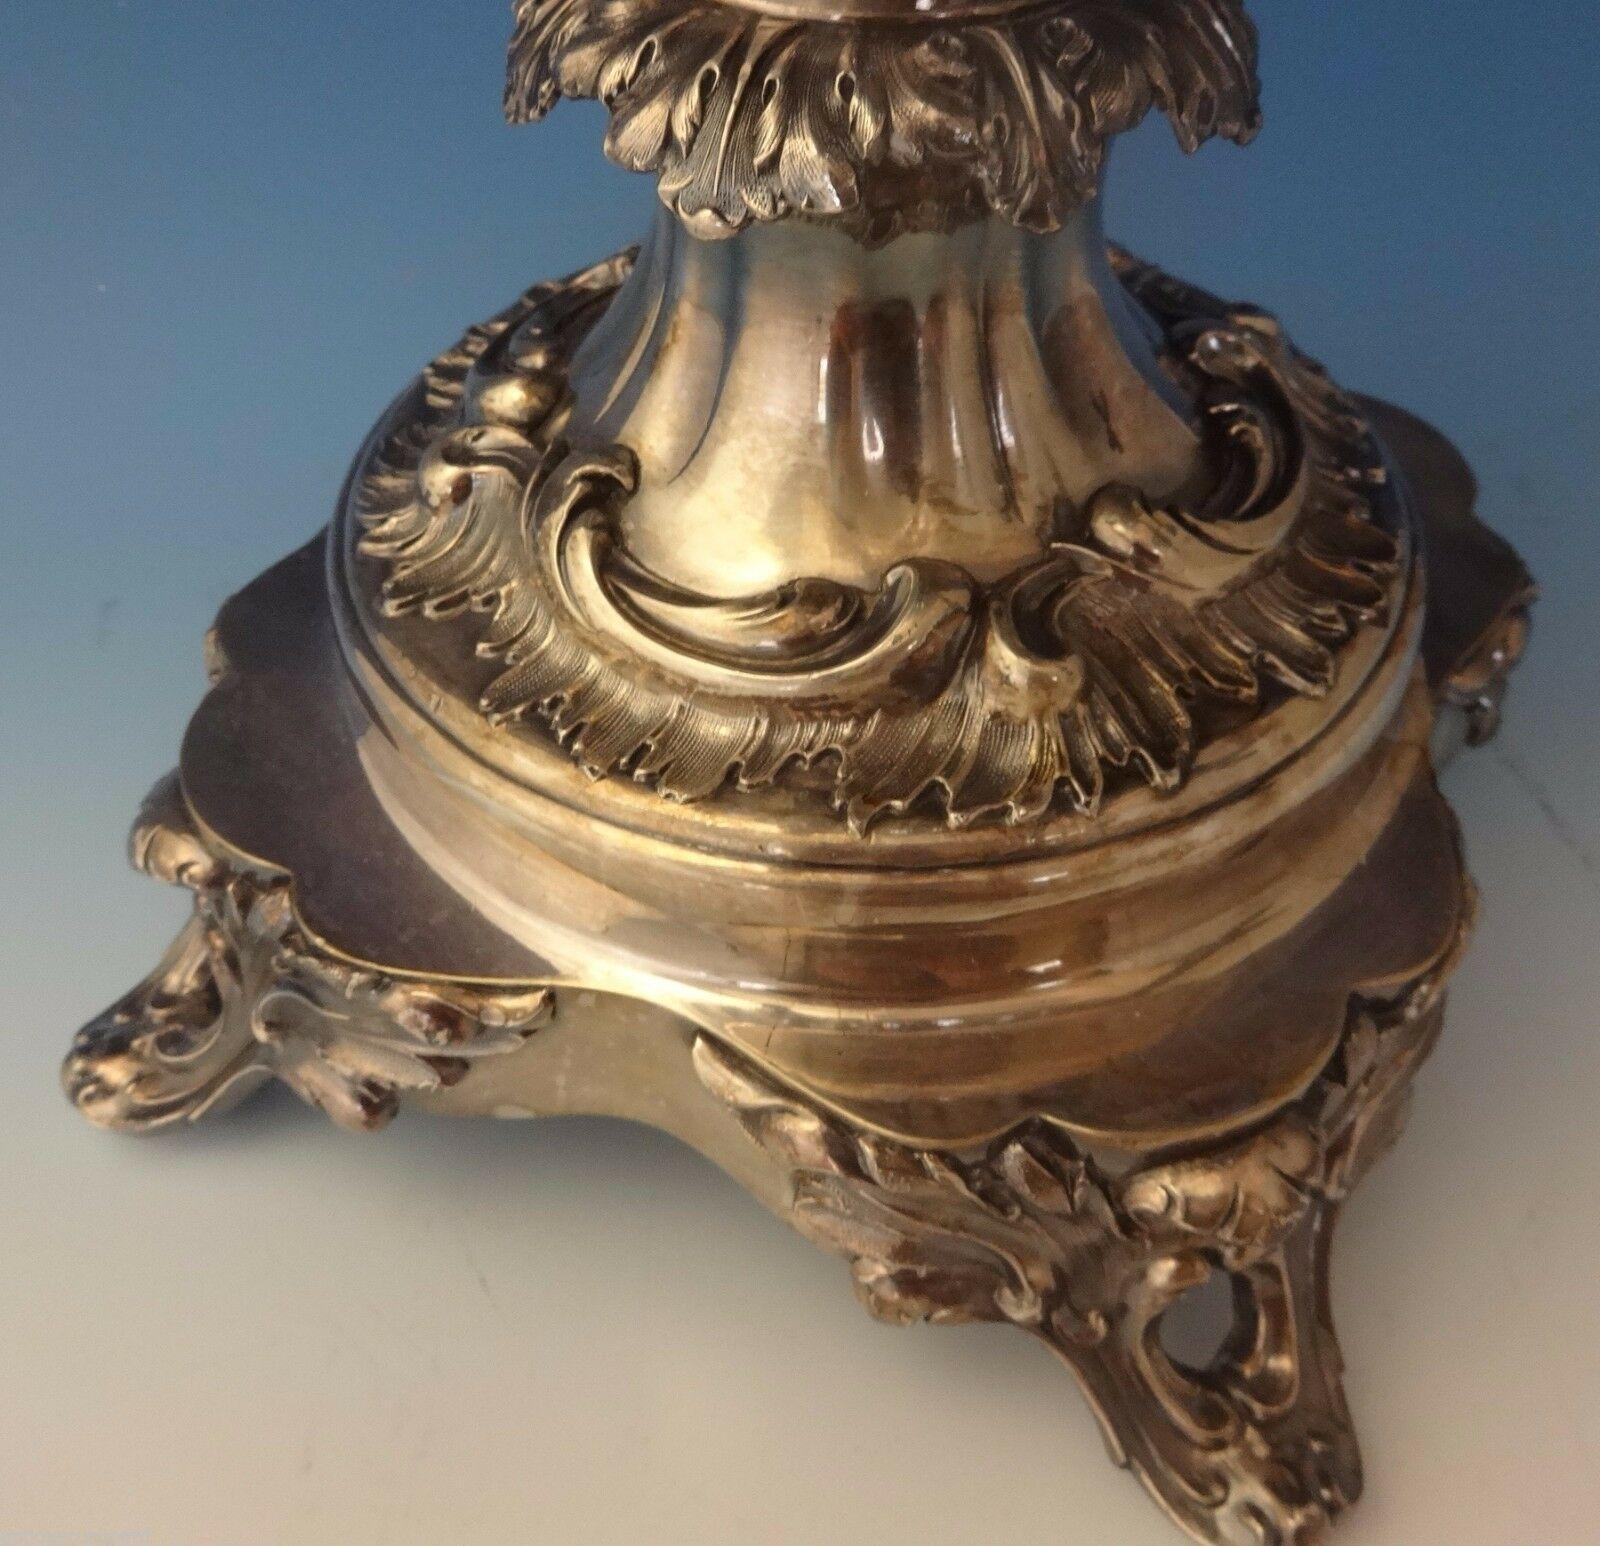 English Silverplate Hot Water Urn with Leaf and Scrollwork Motif 1